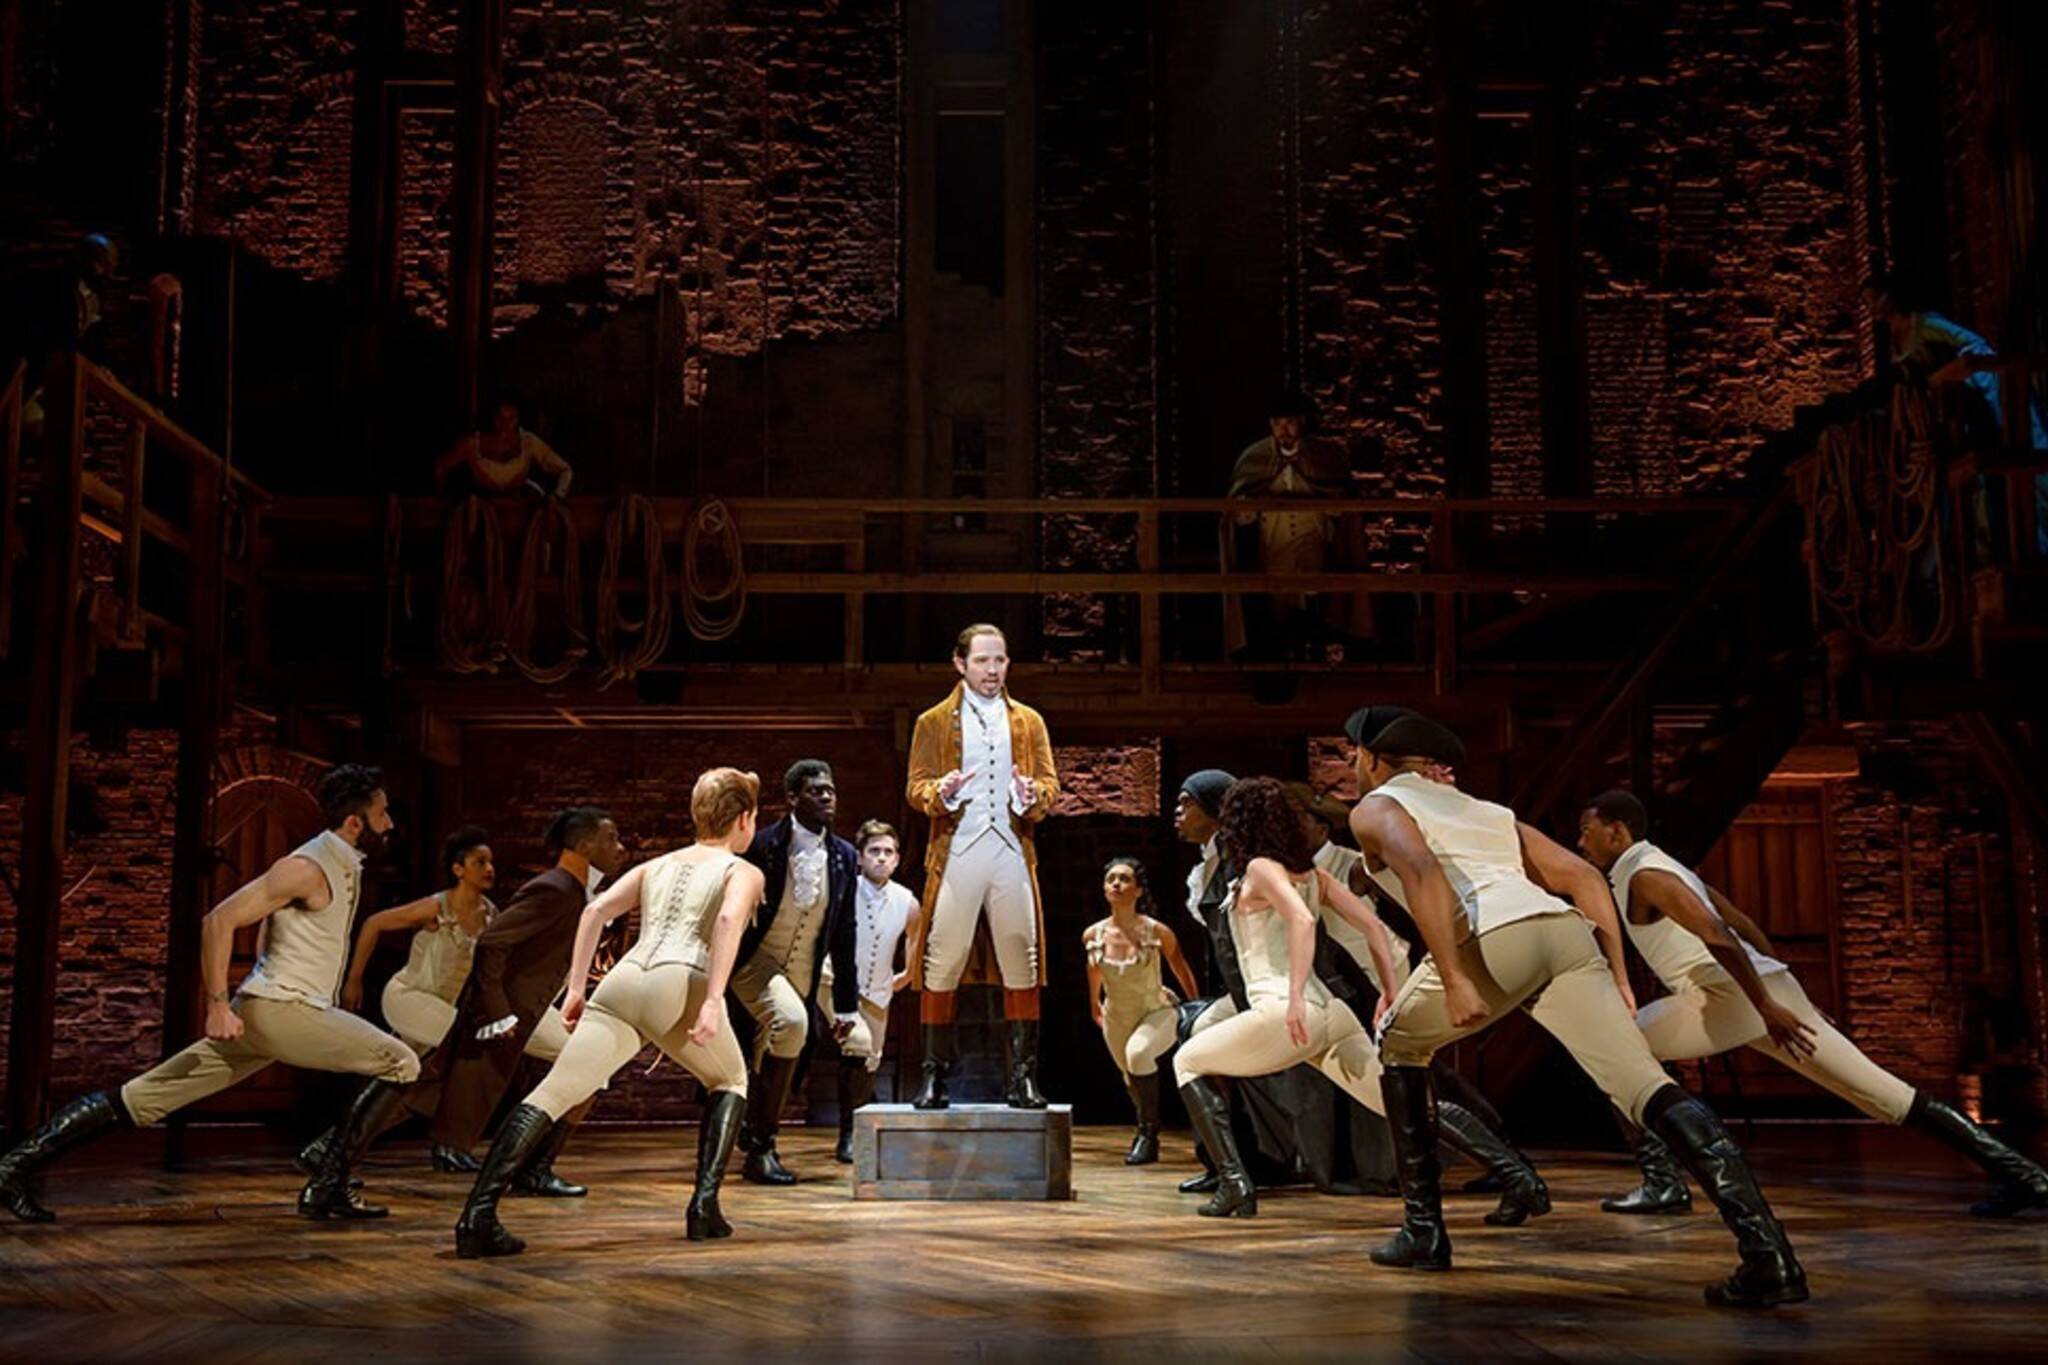 More tickets for Hamilton the musical in Toronto have just been released